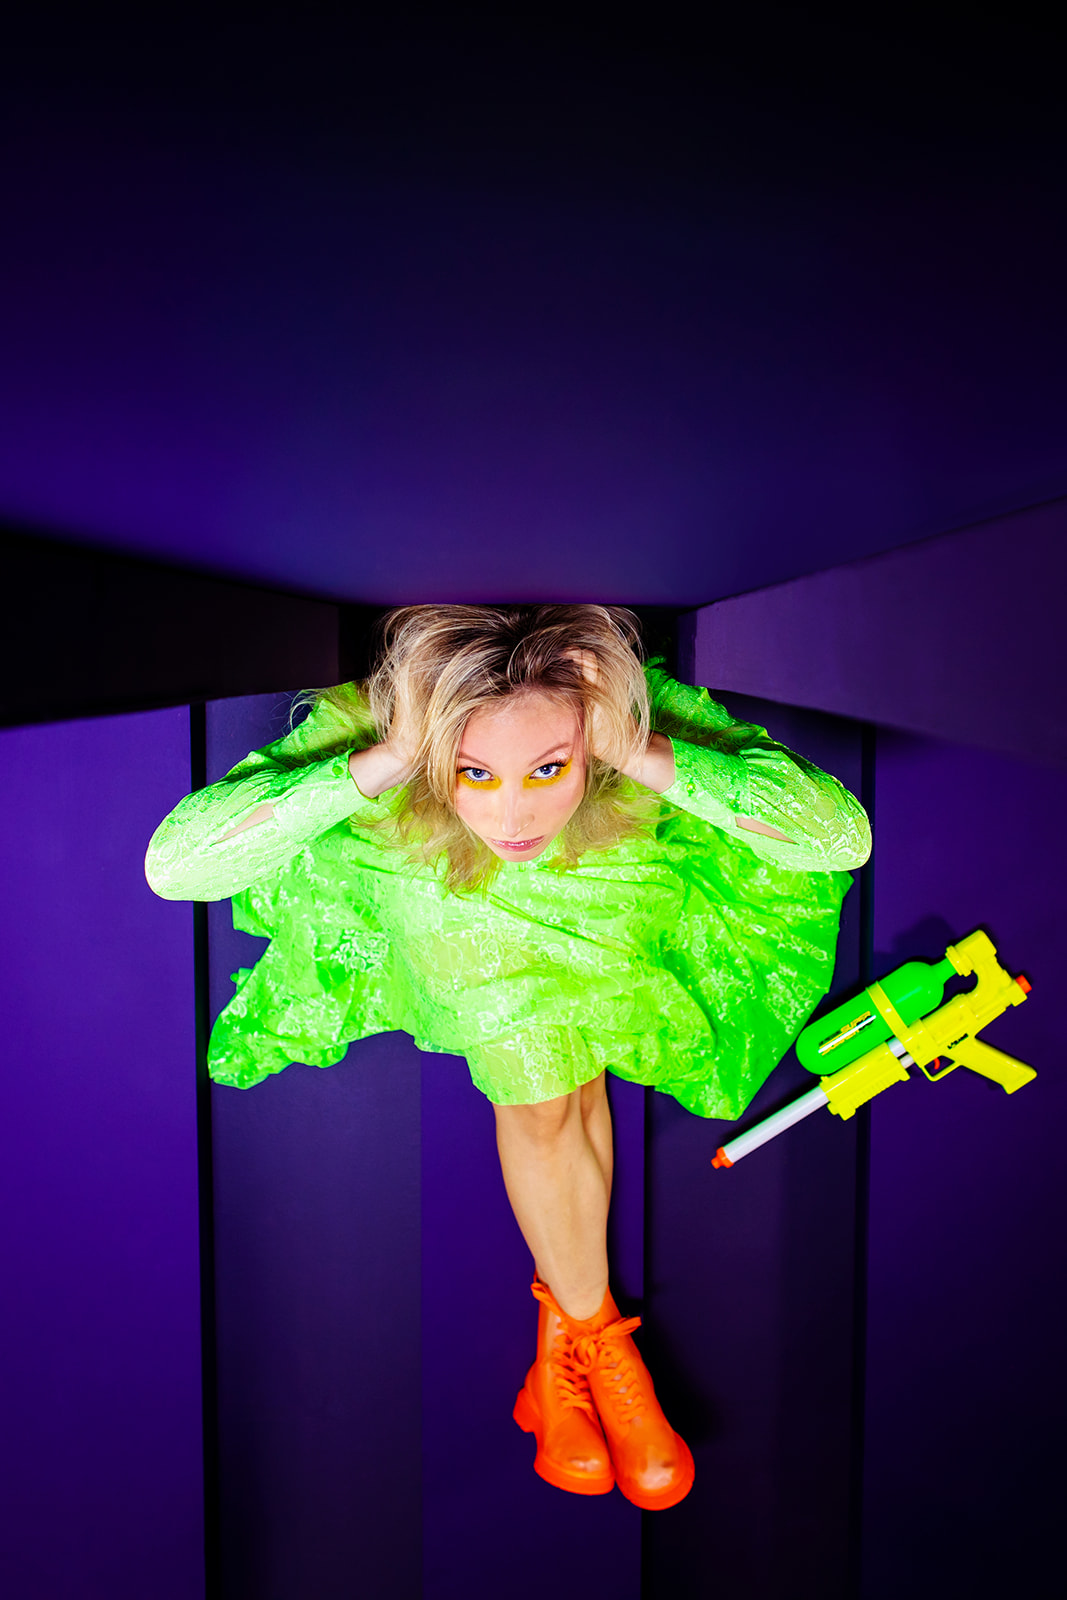 Super Soaker 90s Inspired Neon Military Shoot - Image Property of www.j-dphoto.com